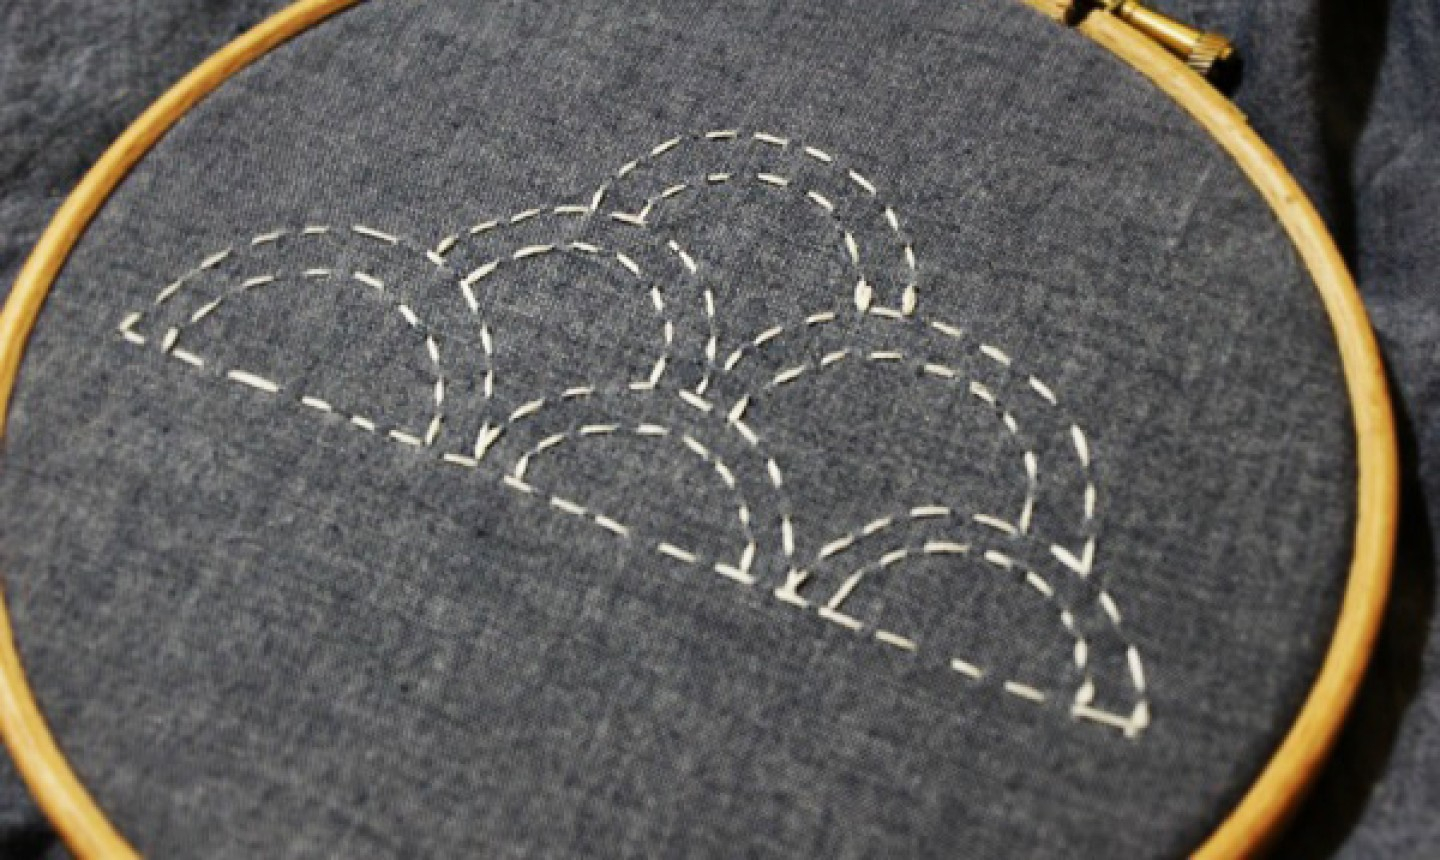 How To Make Hand Embroidery Patterns Learn Simple Sashiko Embroidery With This Whimsical Cloud Pattern